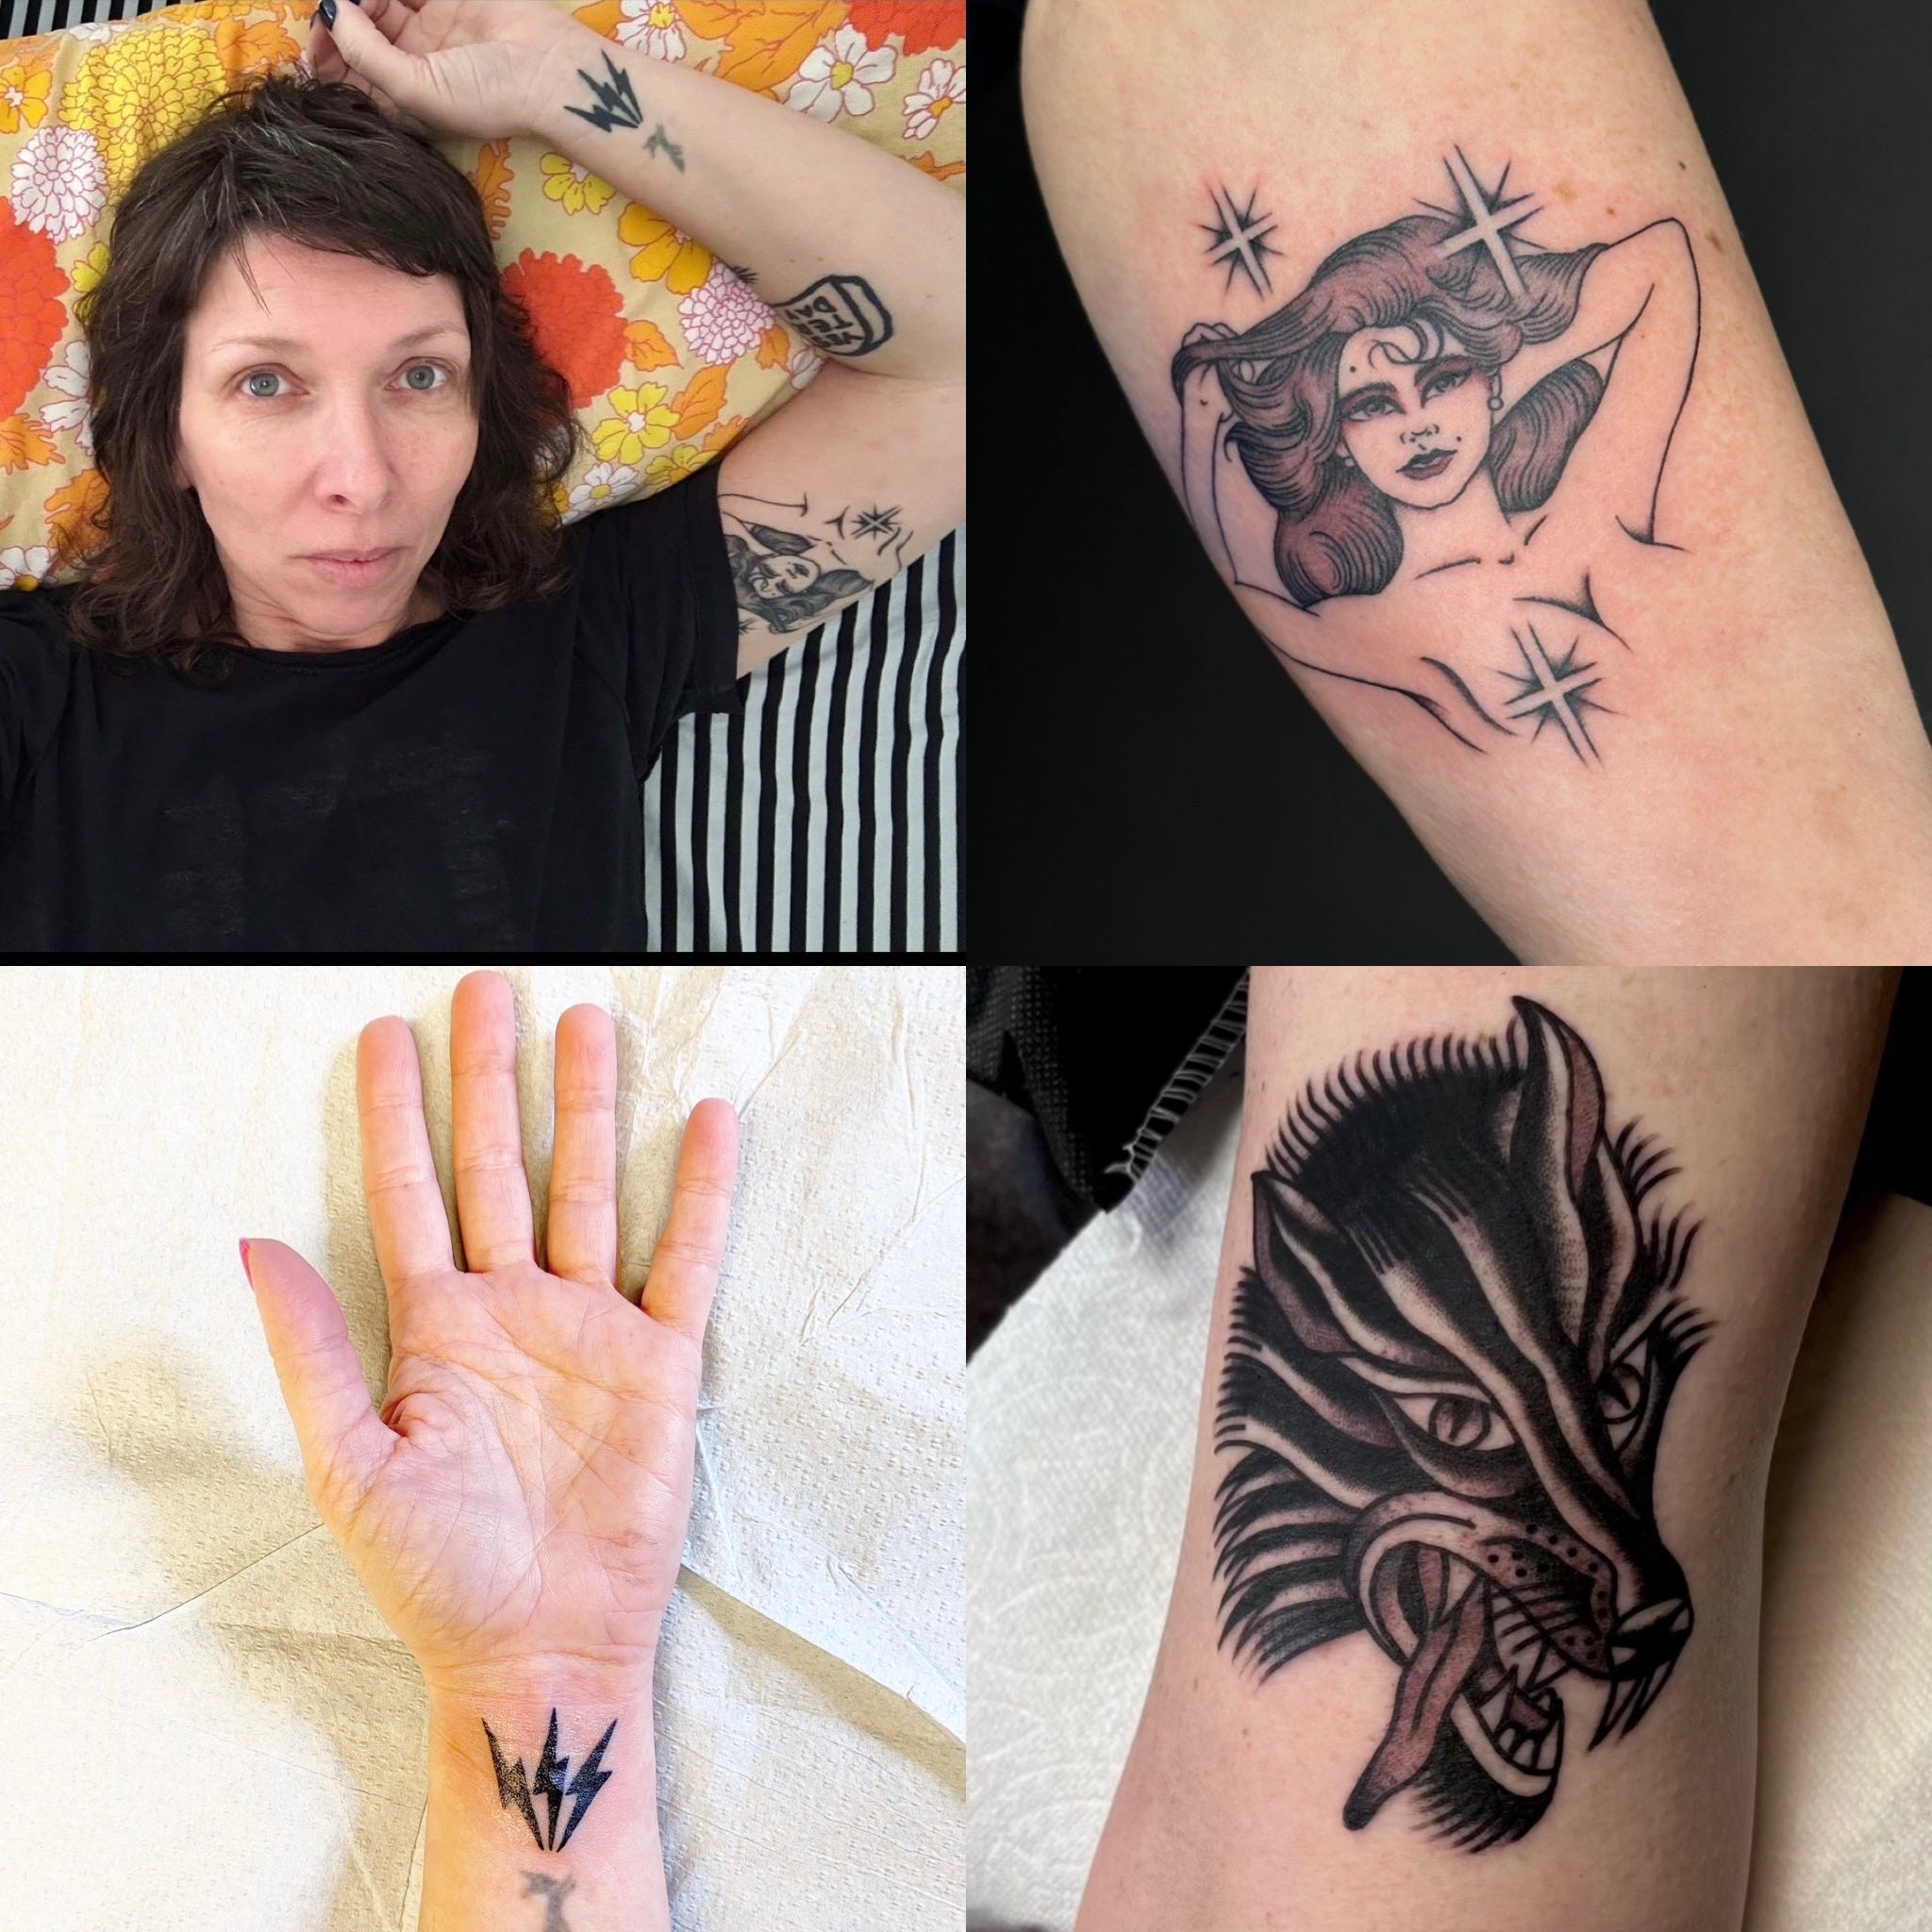 15 Small Hidden Tattoos to Keep Your Ink a Secret in 2020